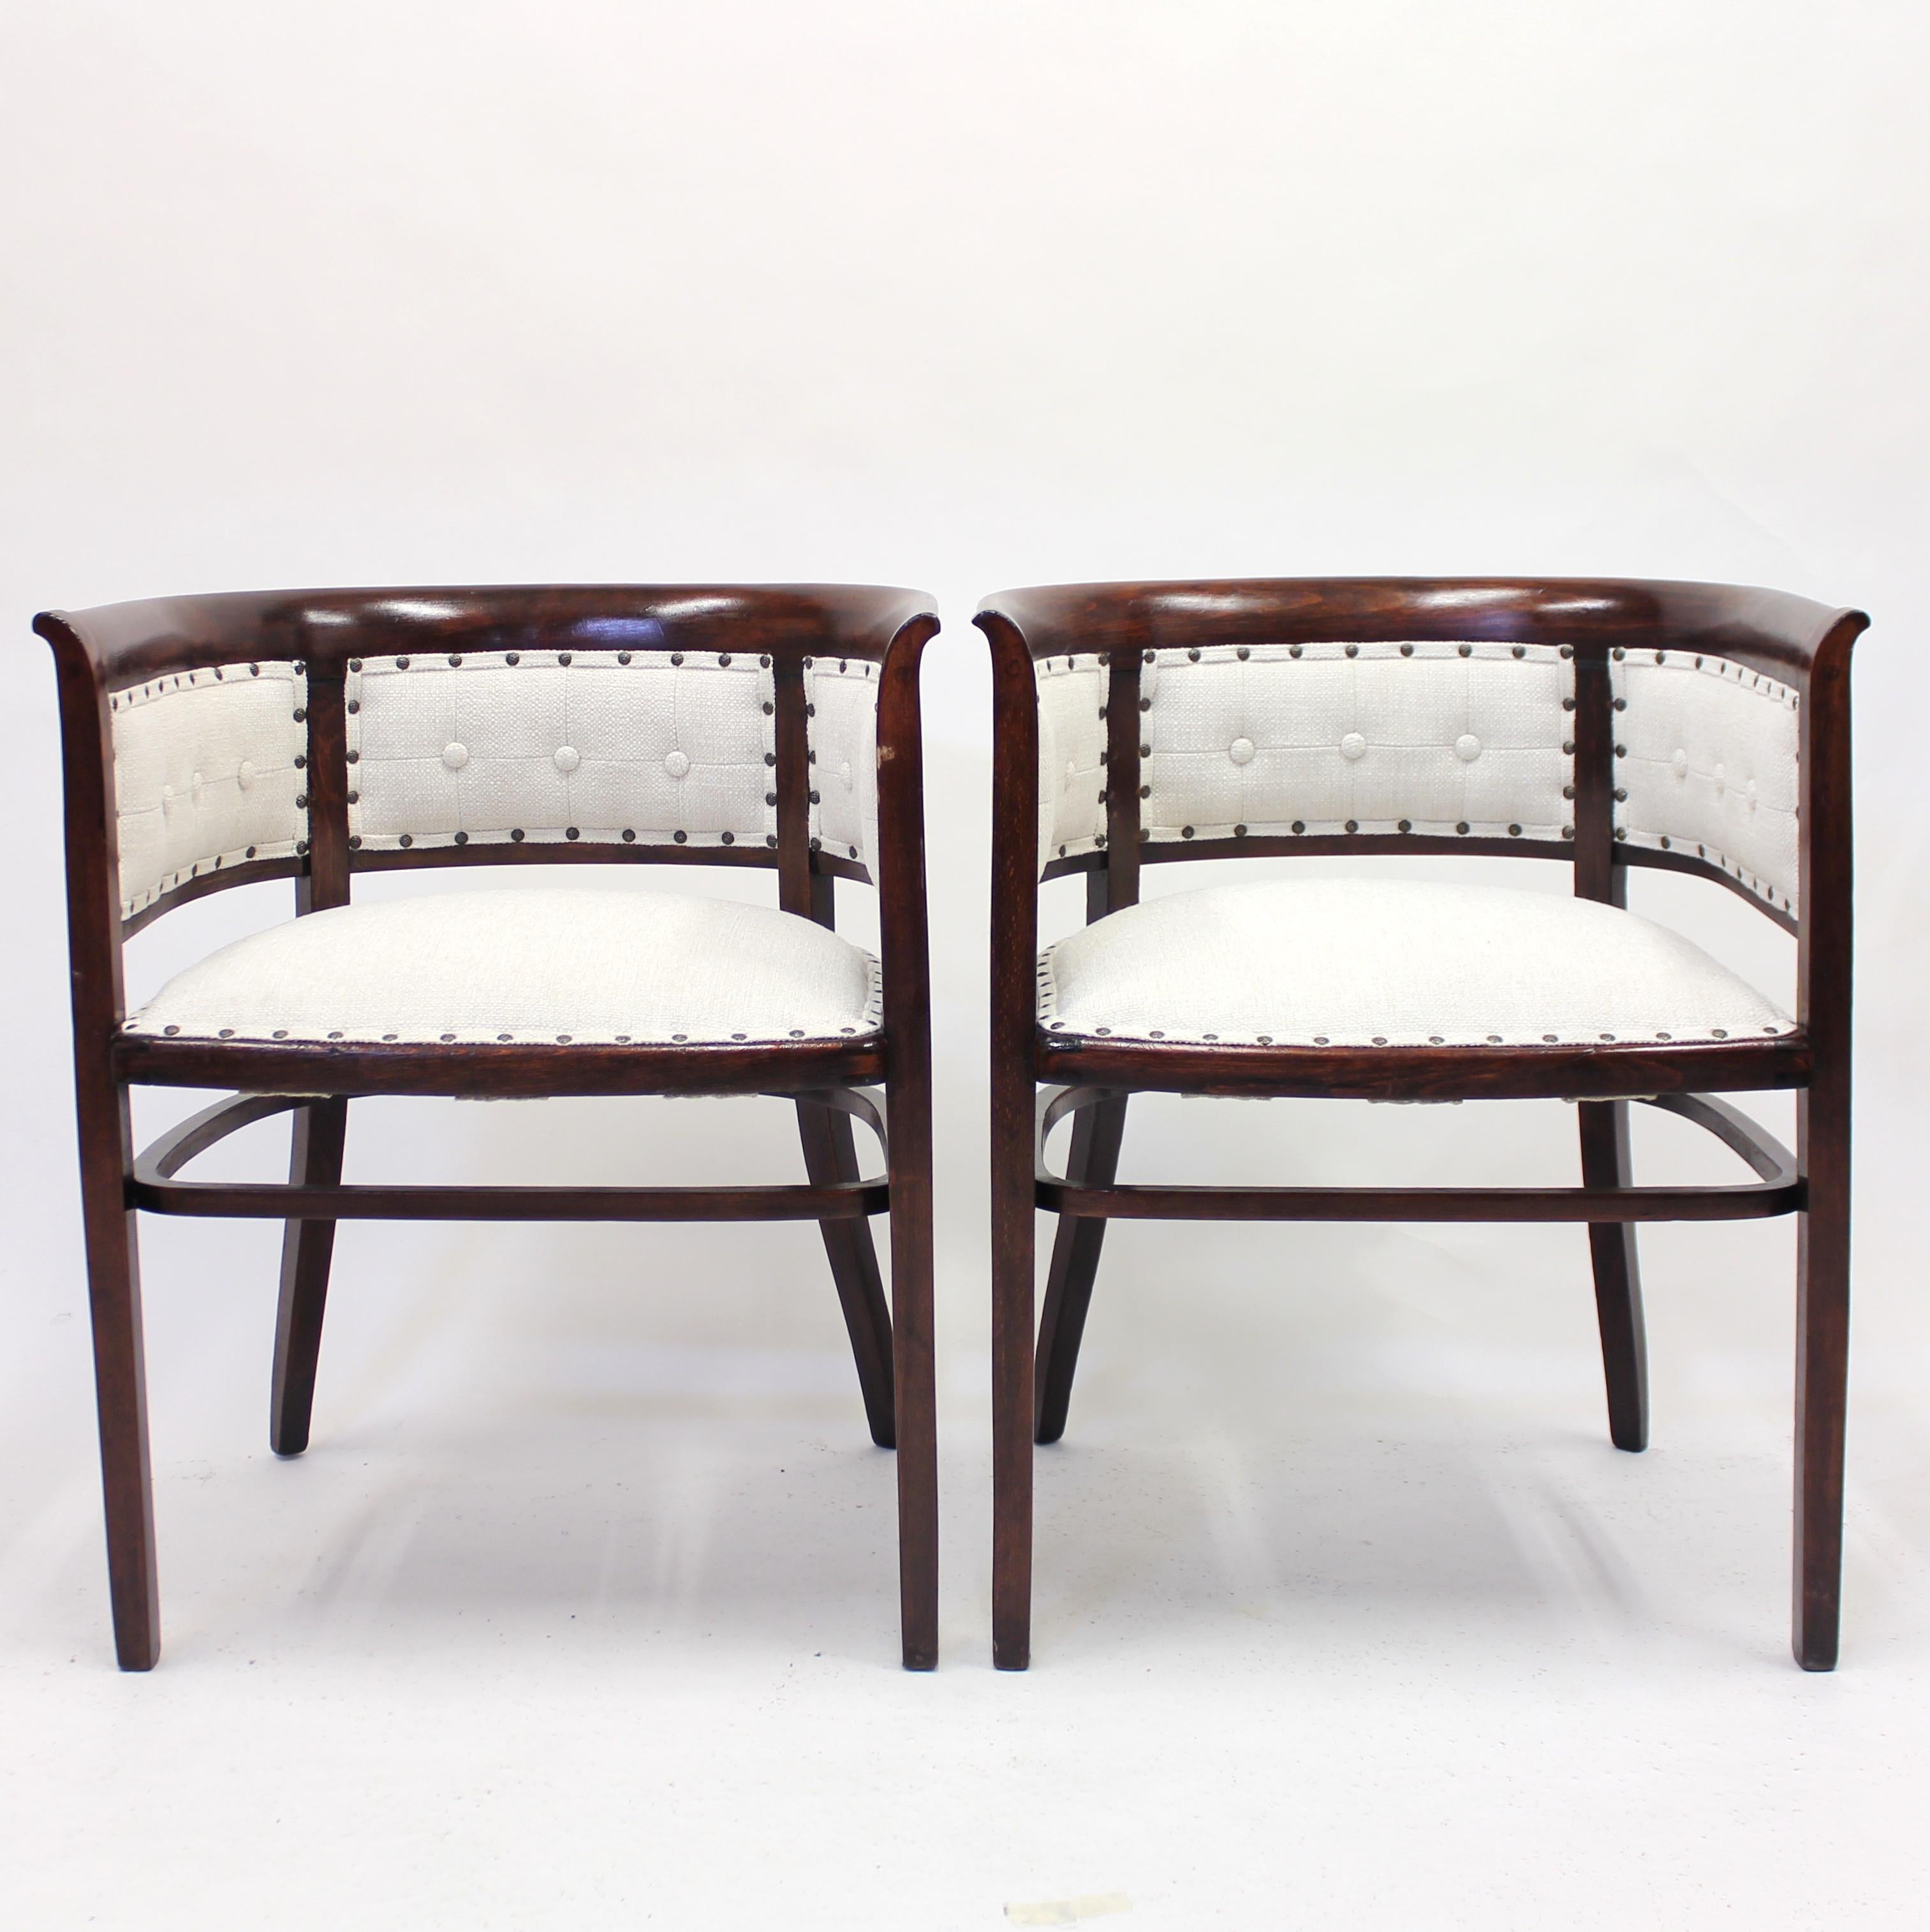 Rare pair of Fischel bentwood armchair in stained birch with newly upholstered seat and back in a white wool fabric. They are very much in the style of both Josef Hoffmann (who worked for both Thonet and Kohn) and Marcel Kammerer (who worked for